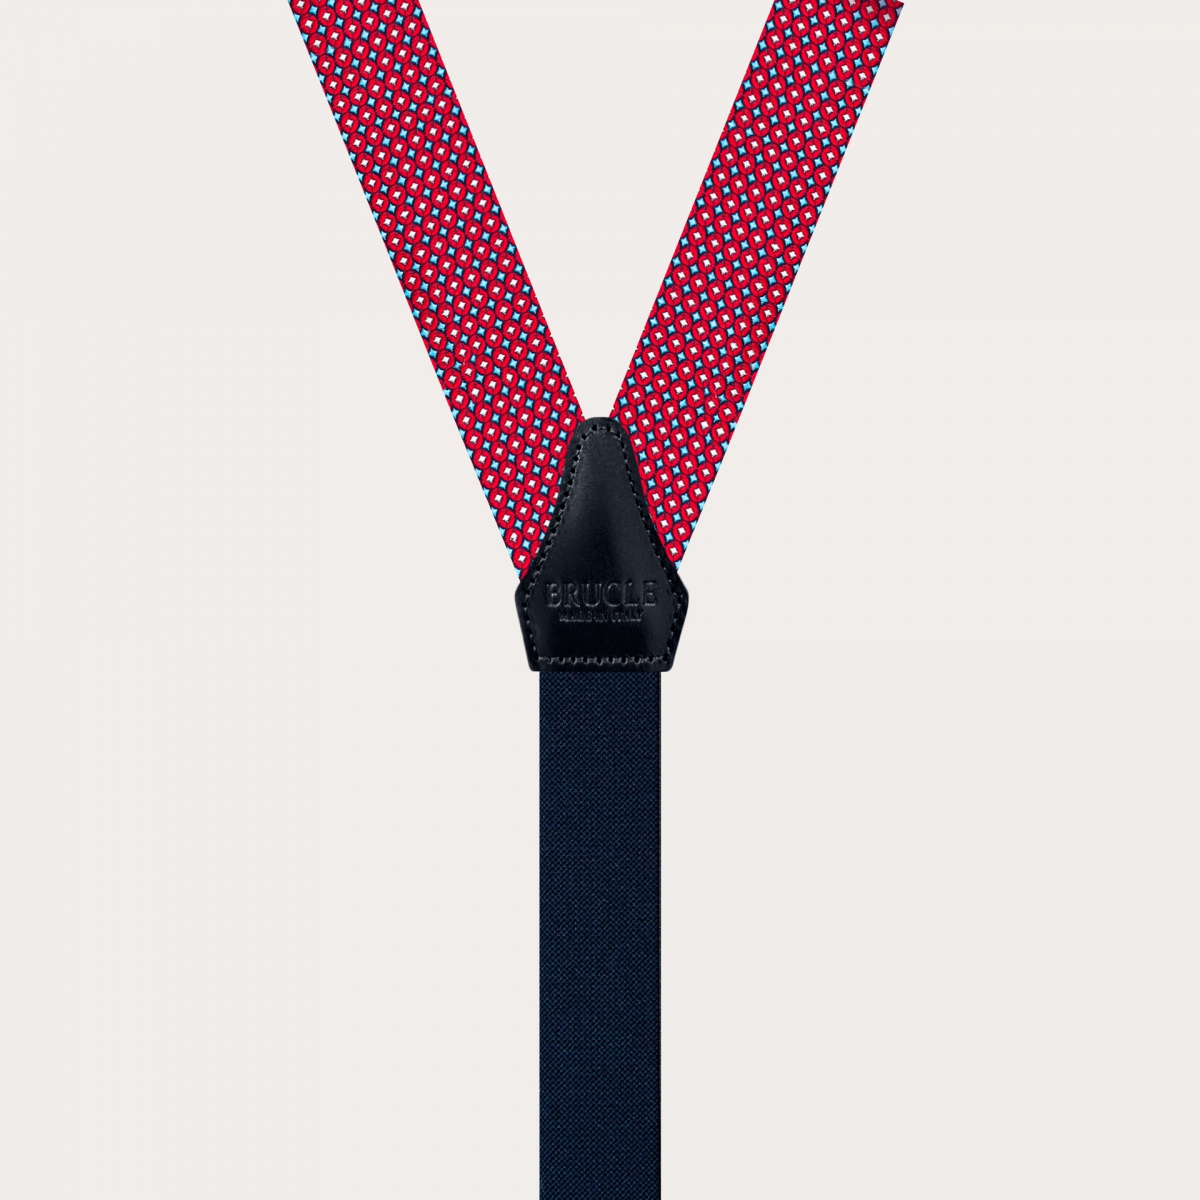 BRUCLE Thin suspenders in jacquard silk, red and light blue geometric pattern